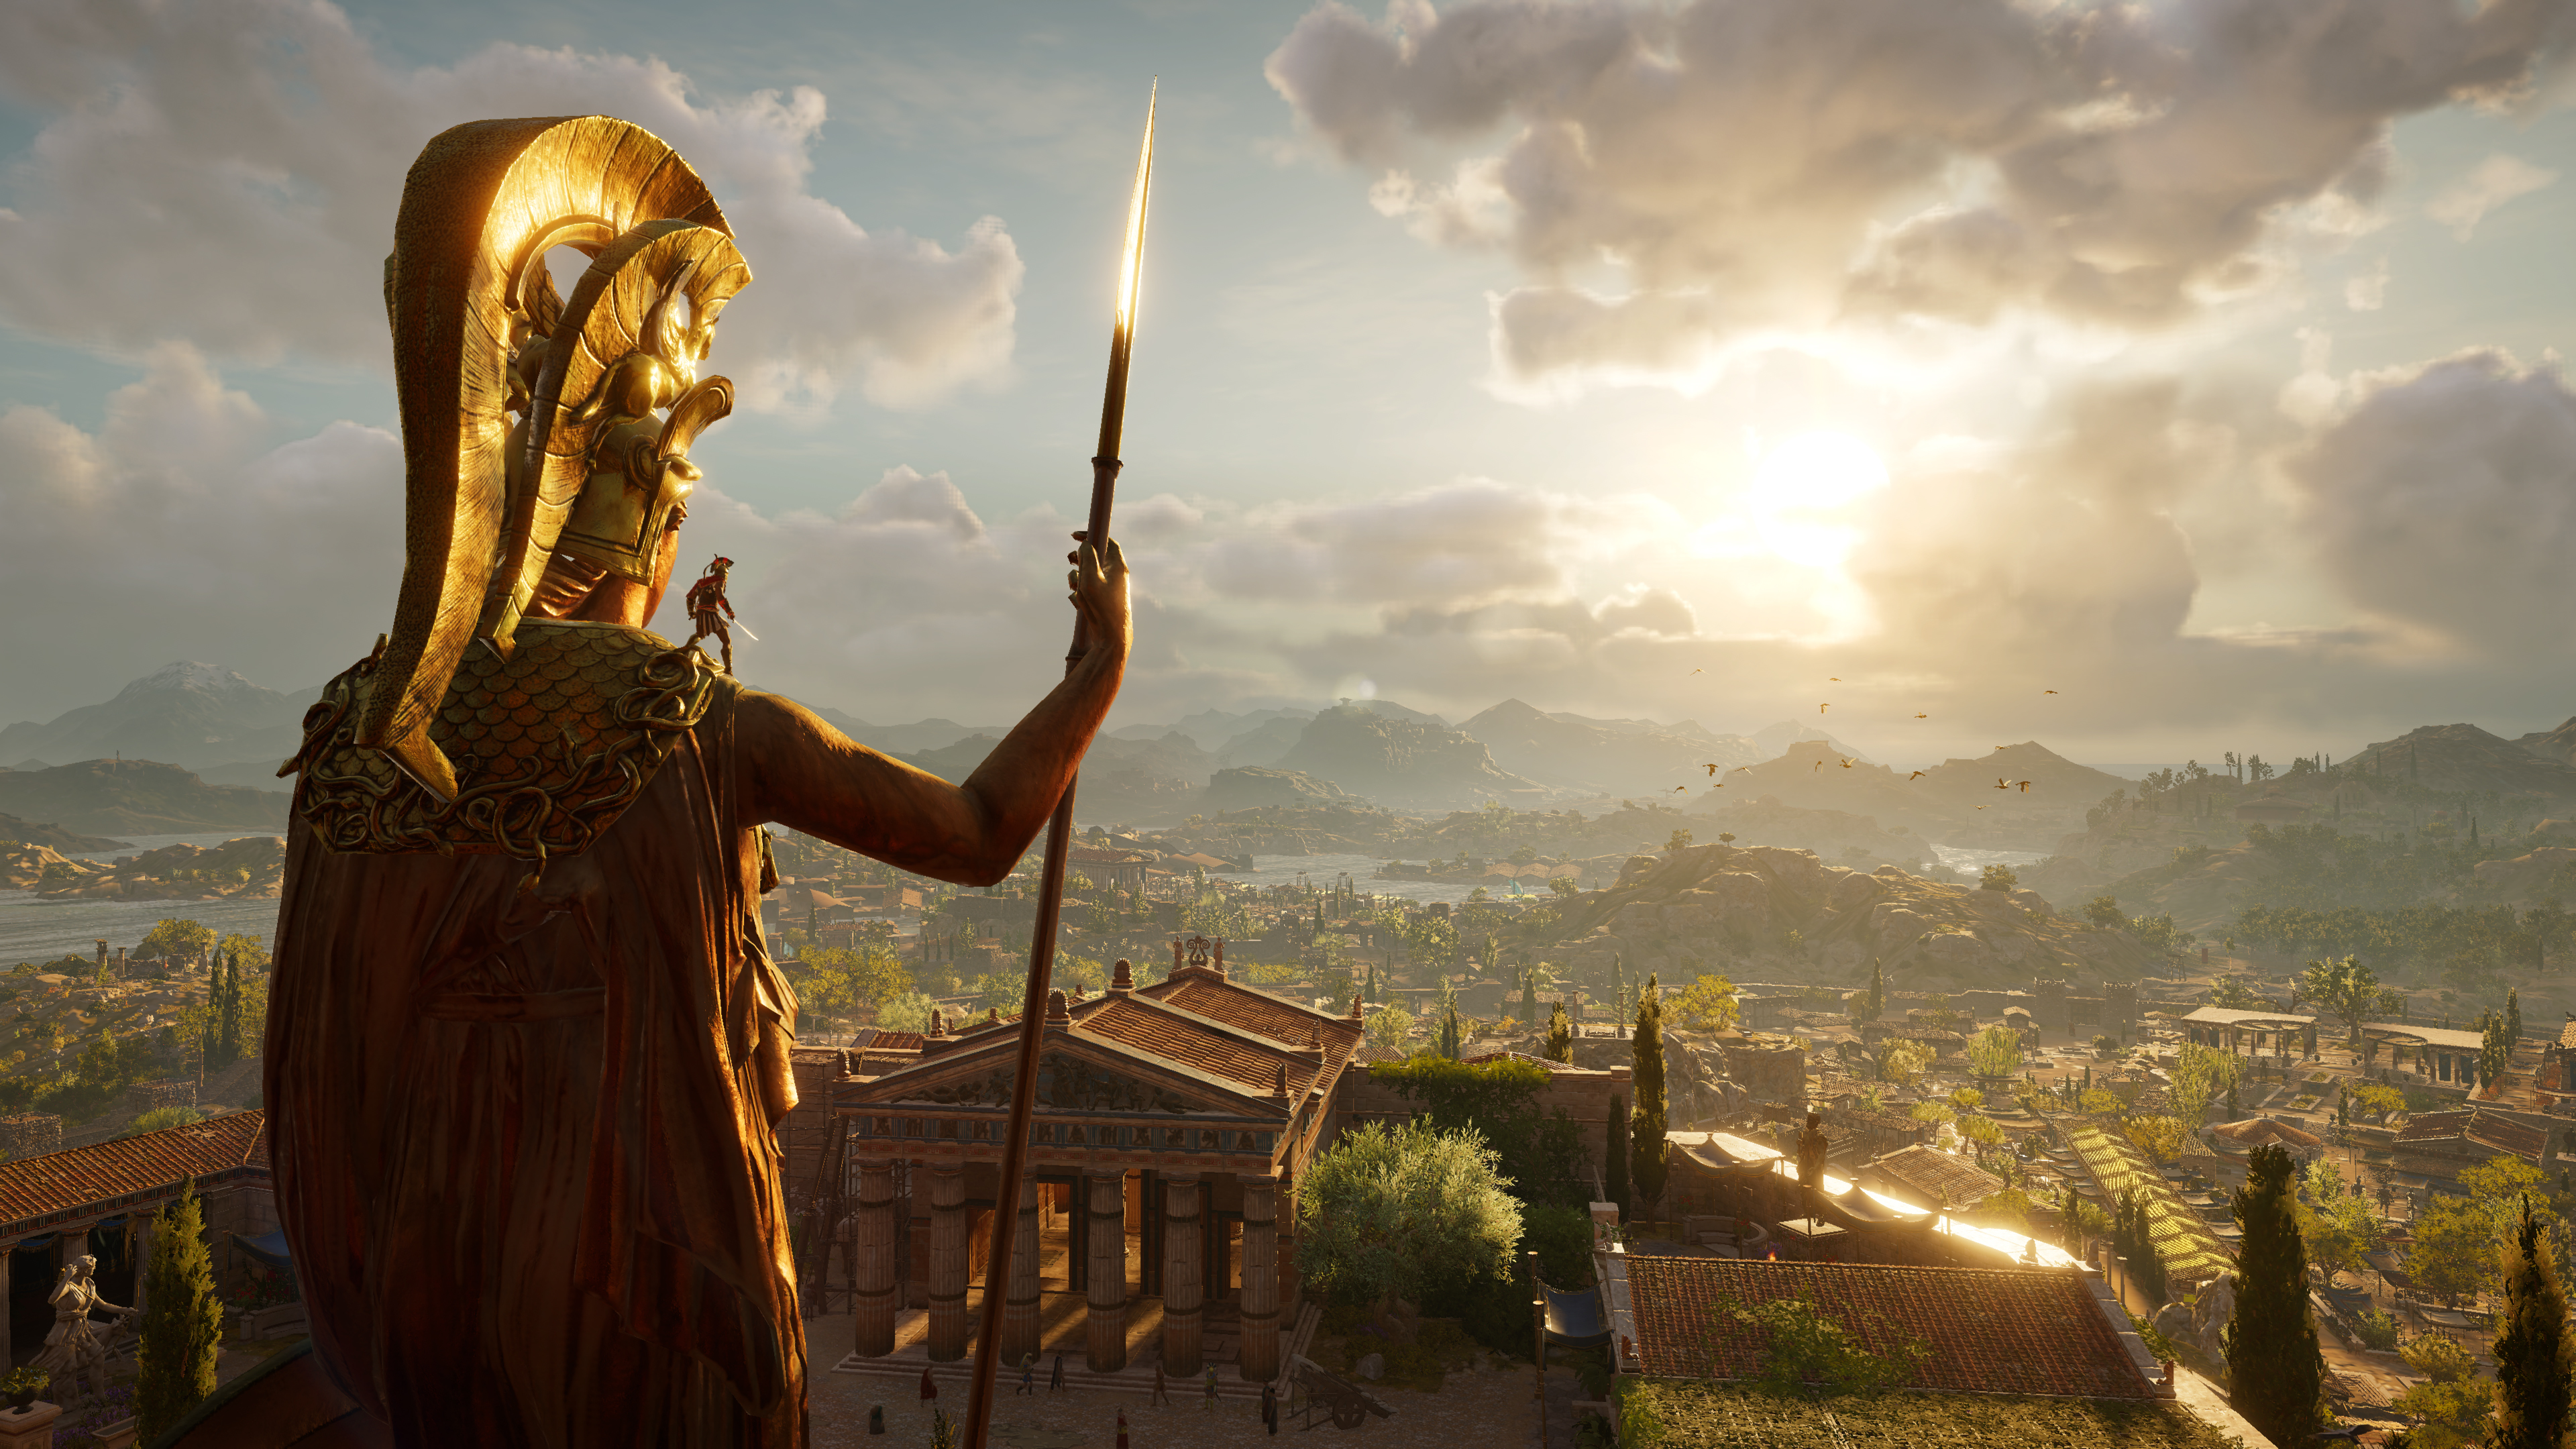 Video Game Assassin's Creed Odyssey HD Wallpaper | Background Image